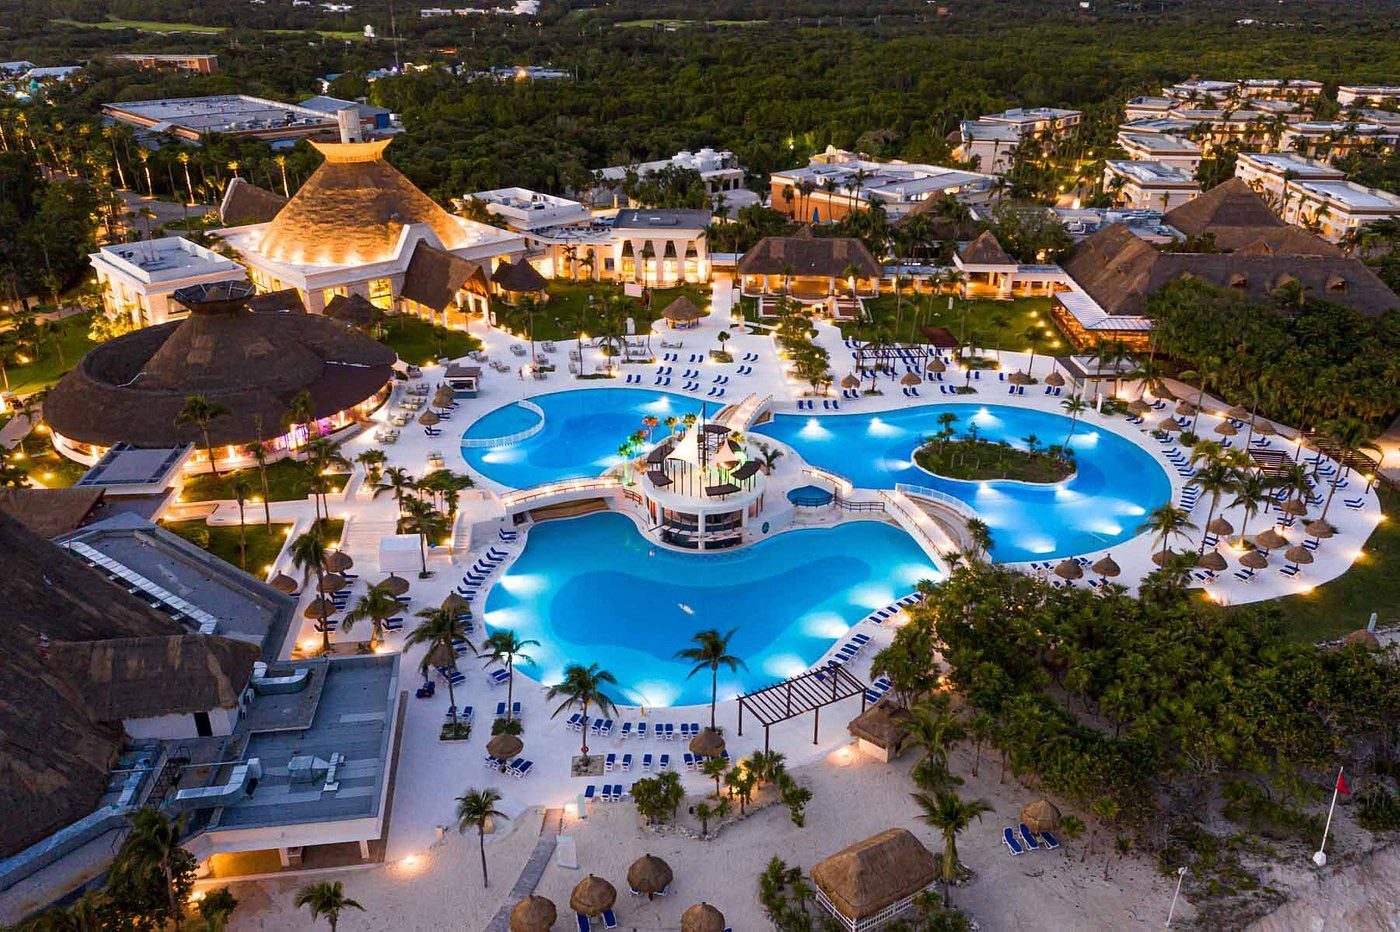 <h3>Bahia Principe Grand Tulum, Mexico</h3> <p>Learning to appreciate different cultures and the world around us is one of the best parts of traveling, and it's never too early to teach that lesson. This <a href="https://www.tripadvisor.com/Hotel_Review-g24189352-d503104-Reviews-Bahia_Principe_Grand_Tulum-Gran_Bahia_Principe_Tulum_Yucatan_Peninsula.html" rel="noopener noreferrer">recently renovated eco-friendly resort</a> offers a multitude of fun ways for children to discover that, from a kids' club with 10 Mayan-themed play areas—including a zip line and a water park—to planned activities, such as archeological digs and stories about the ancient gods of the jungle.</p> <p>The Eco Bahia program puts an environmental slant on its teachings and is part of Bahia Principe Hotels & Resorts' commitment to responsible travel. This focus has won the resort multiple awards for sustainability and social and <a href="https://www.rd.com/article/sustainable-travel/" rel="noopener noreferrer">environmental responsibility</a>, which is even more impressive when you consider the breadth of what it offers: six restaurants, a buffet that has its own kids' section, a teens' club designed with input from actual teens and exchange privileges with free shuttle service every 10 minutes to nearby Bahia Principe Grand Coba.</p> <p><strong>Pros:</strong></p> <ul> <li>Committed to ecological conservation through water, waste, energy and recycling programs</li> <li>Meticulously maintained white-sand beach</li> <li>Extensive kids services and attractions with an emphasis on local culture, history and the environment</li> </ul> <p><strong>Cons:</strong></p> <ul> <li>Semiformal resort attire required for a la carte restaurants</li> <li>Only one hour of non-motorized sports allowed daily</li> </ul> <p class="listicle-page__cta-button-shop"><a class="shop-btn" href="https://www.tripadvisor.com/Hotel_Review-g24189352-d503104-Reviews-Bahia_Principe_Grand_Tulum-Gran_Bahia_Principe_Tulum_Yucatan_Peninsula.html">Book Now</a></p>